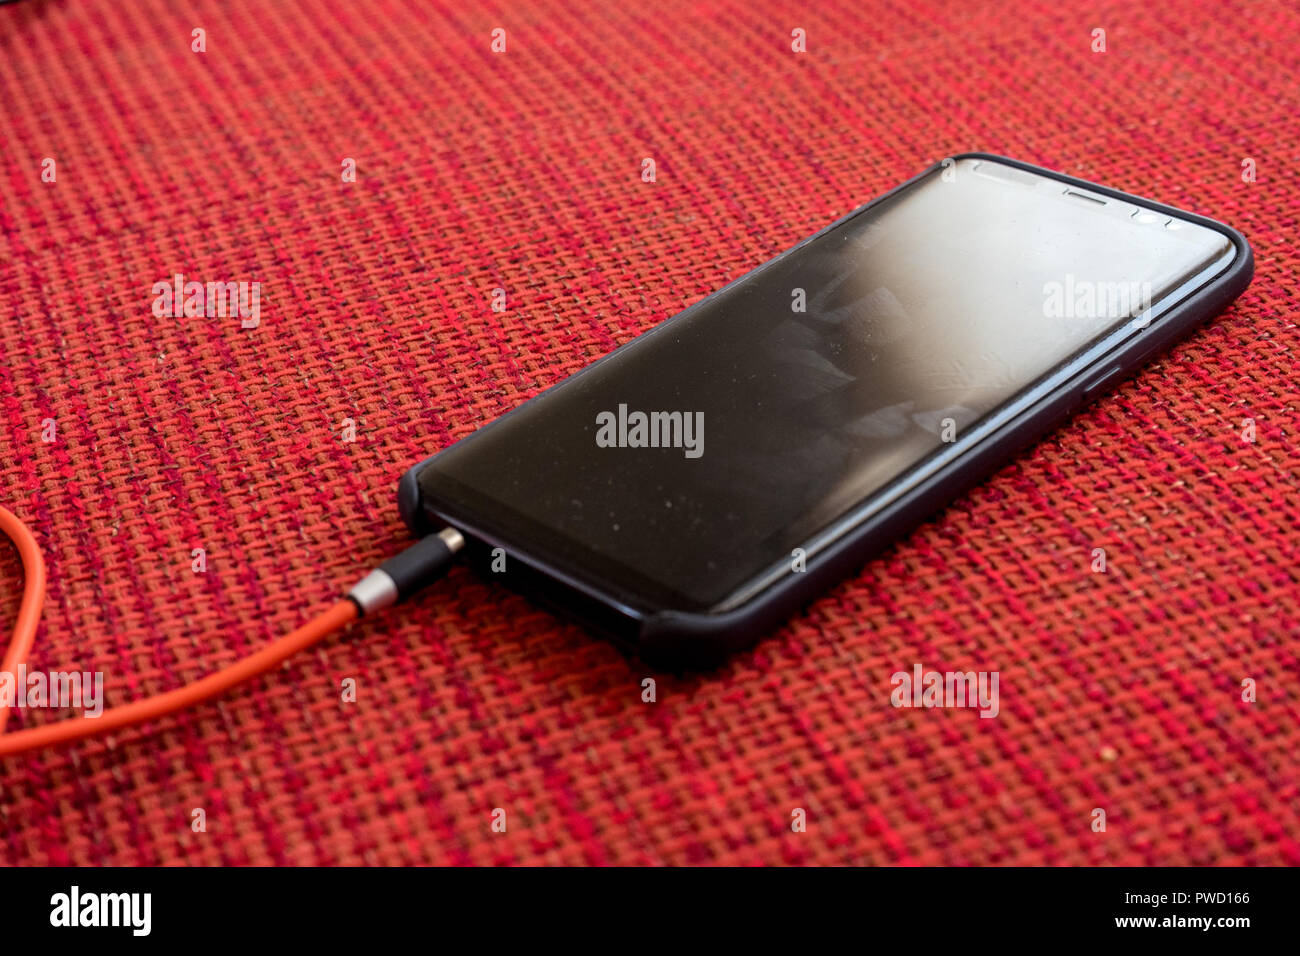 Netherlands, Hague, Schiphol, Europe, a black cellphone with a headphone jack Stock Photo